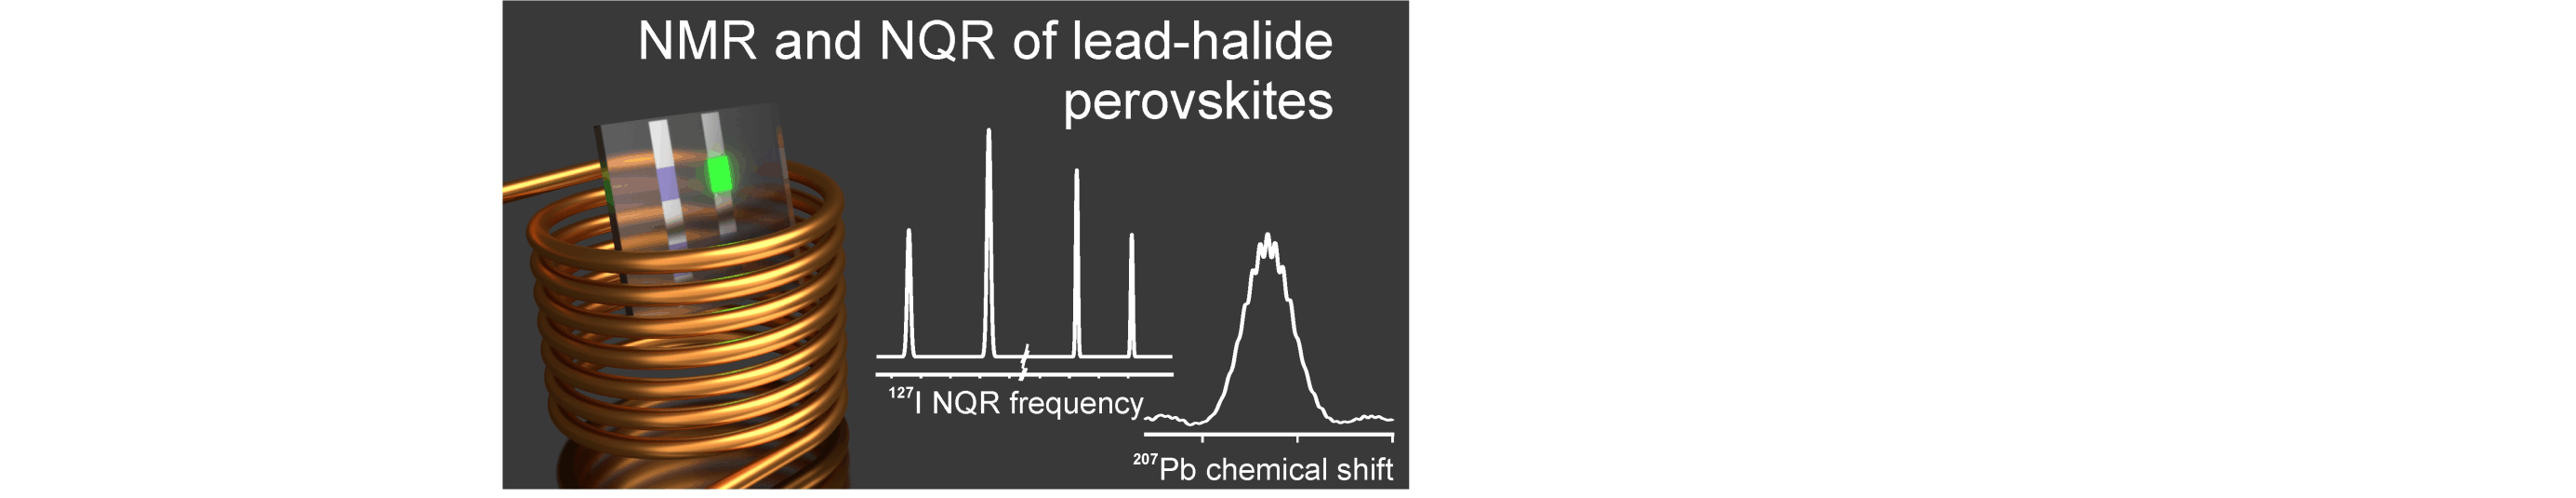 Solid-​state NMR and NQR Spectroscopy of Lead-​Halide Perovskite Materials